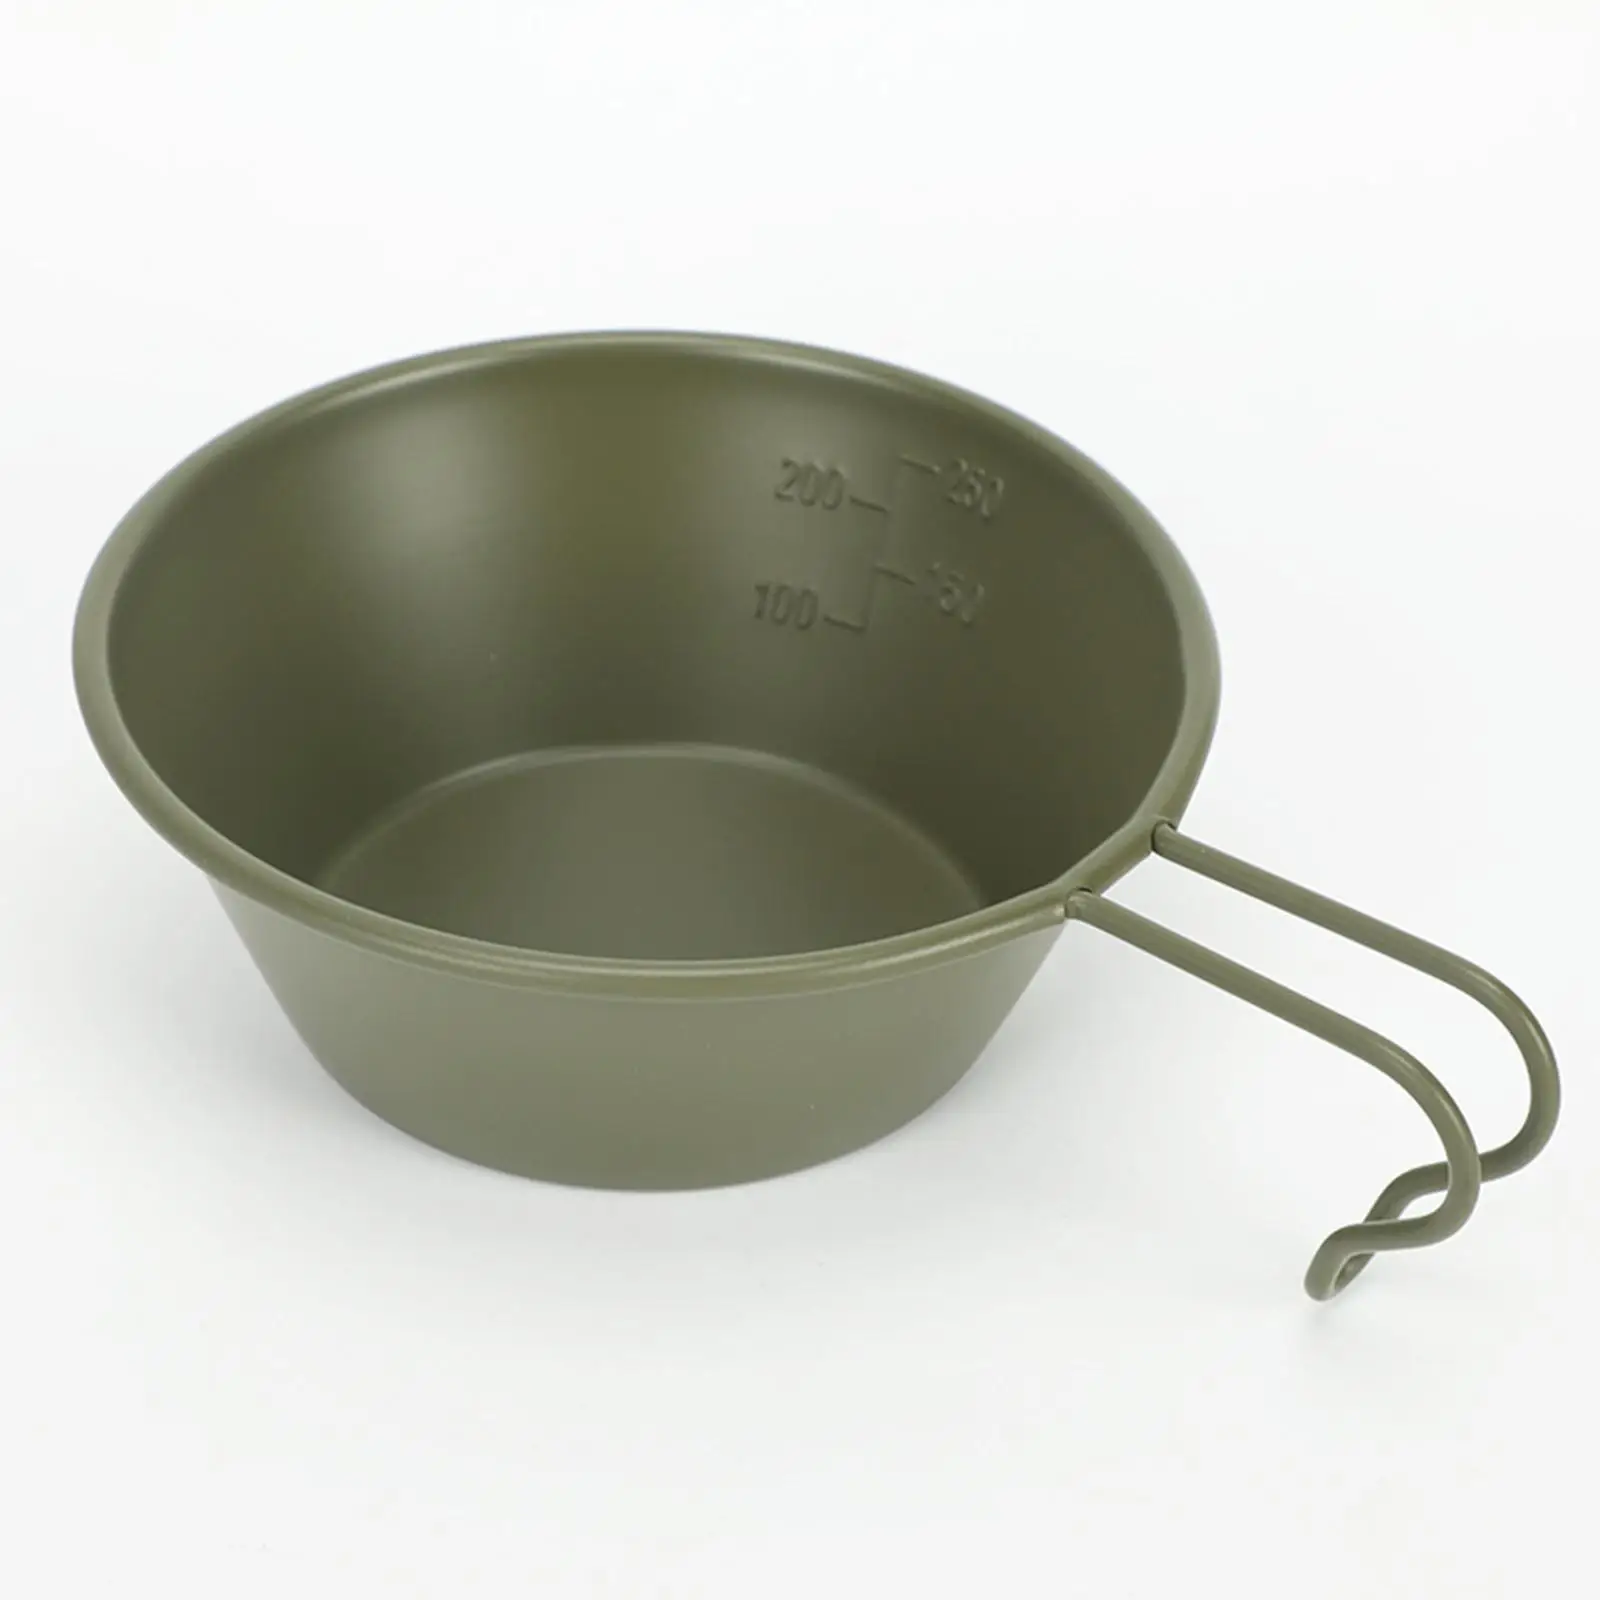 Stainless Steel Camping Bowl Outdoor Cookware Utensil Cooking Lightweight